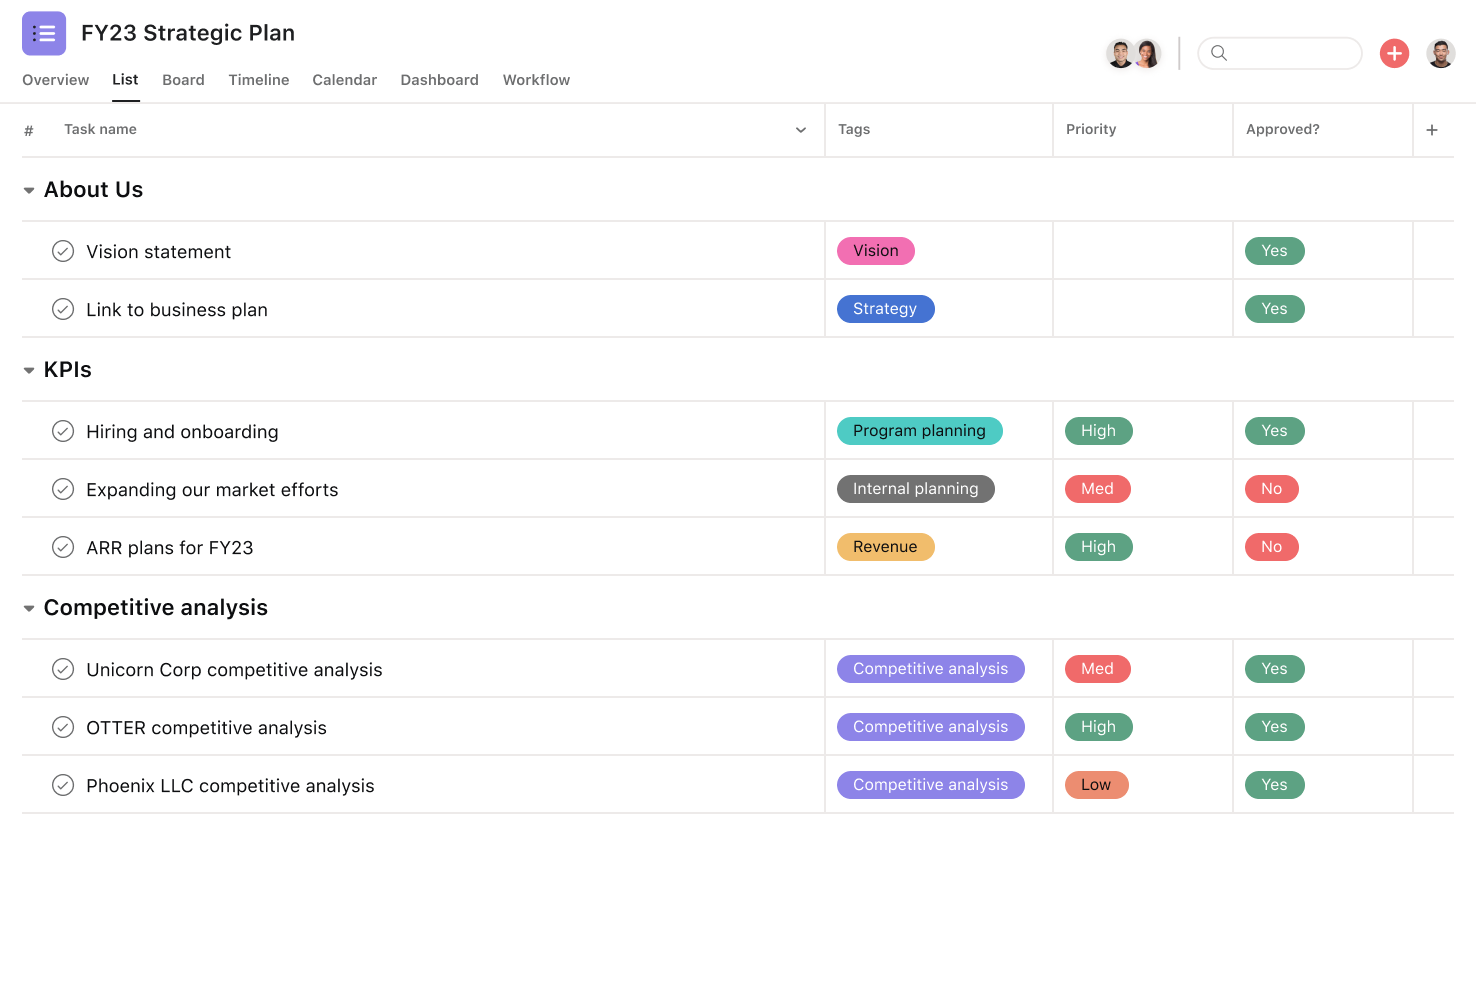 [Product UI] Strategic planning project in Asana, spreadsheet-style project view (List)